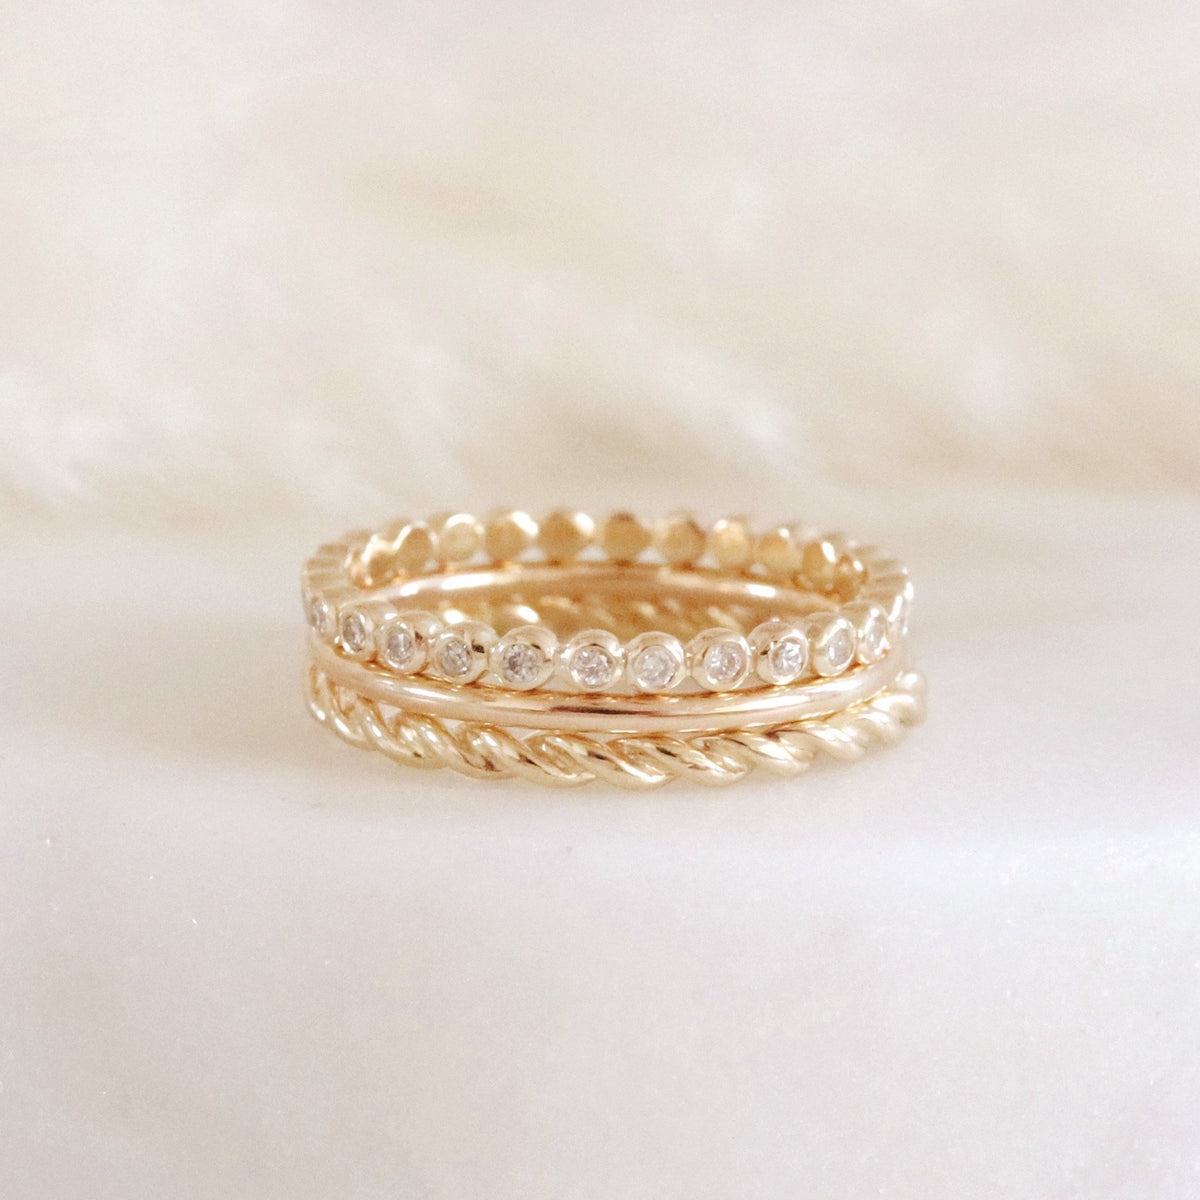 LOVE THIN DISK BAND RING - DIAMONDS &amp; SOLID 14K GOLD - SO PRETTY CARA COTTER